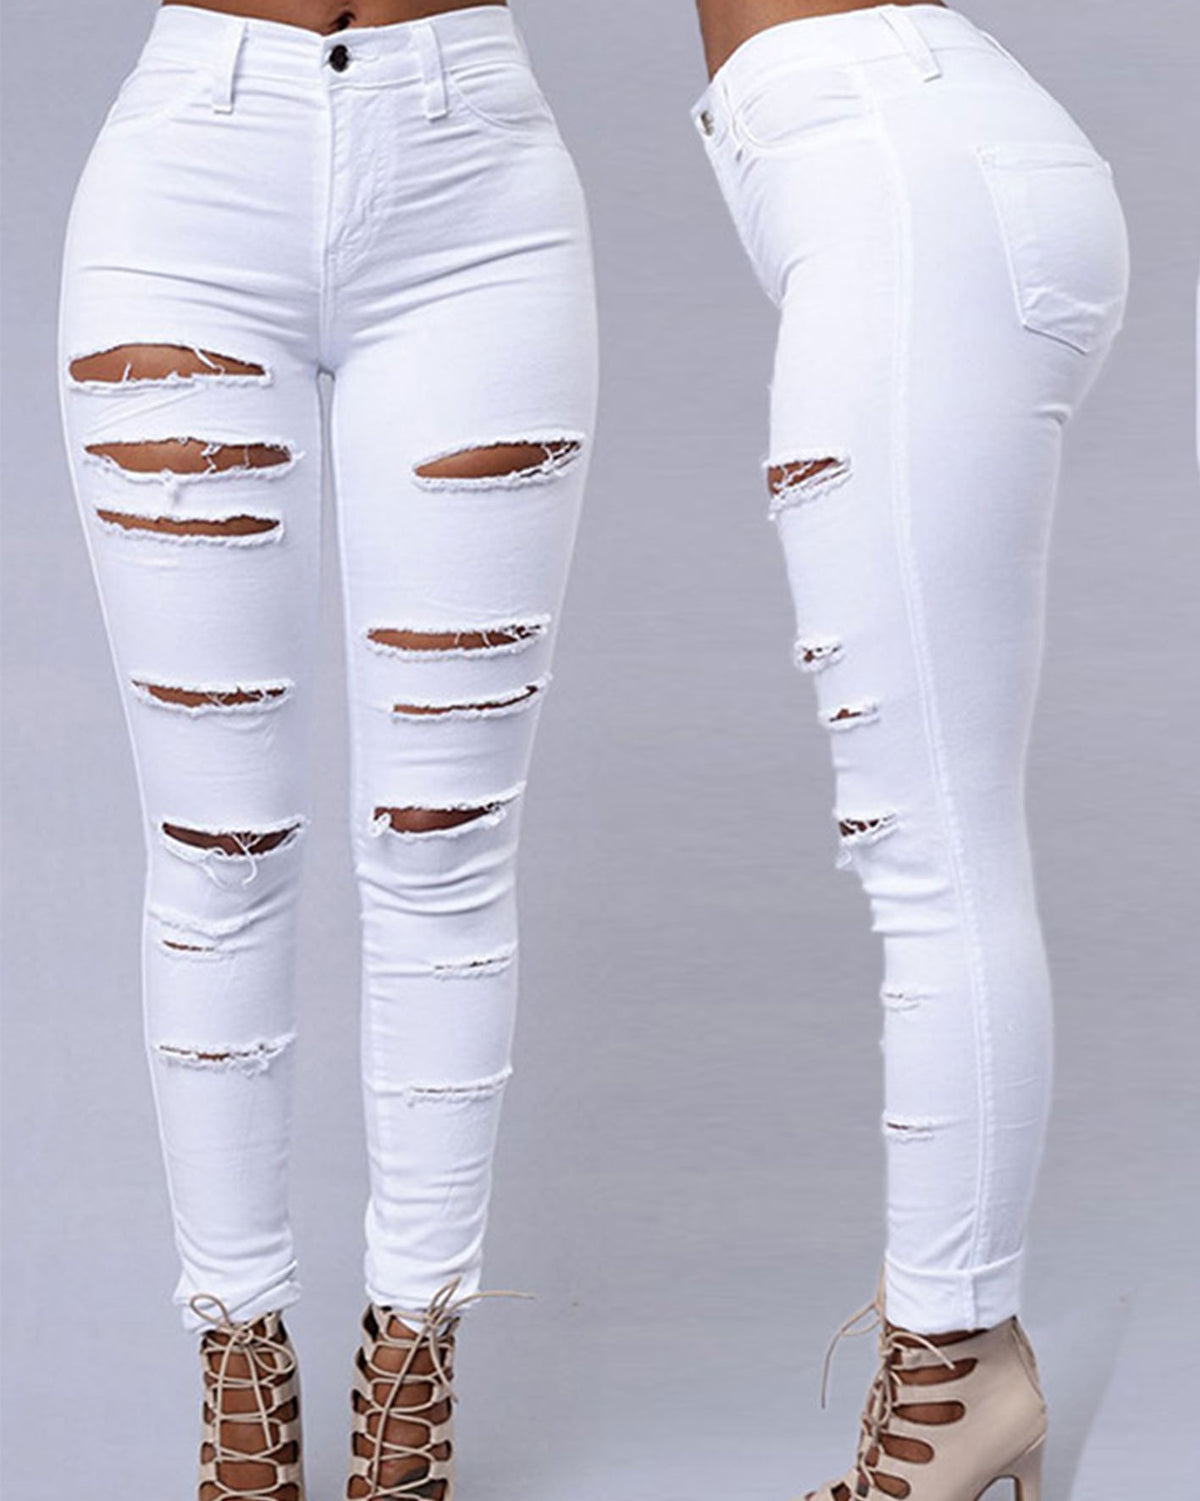 Women's Jeans Stretch Ripped Legs Skinny Niners